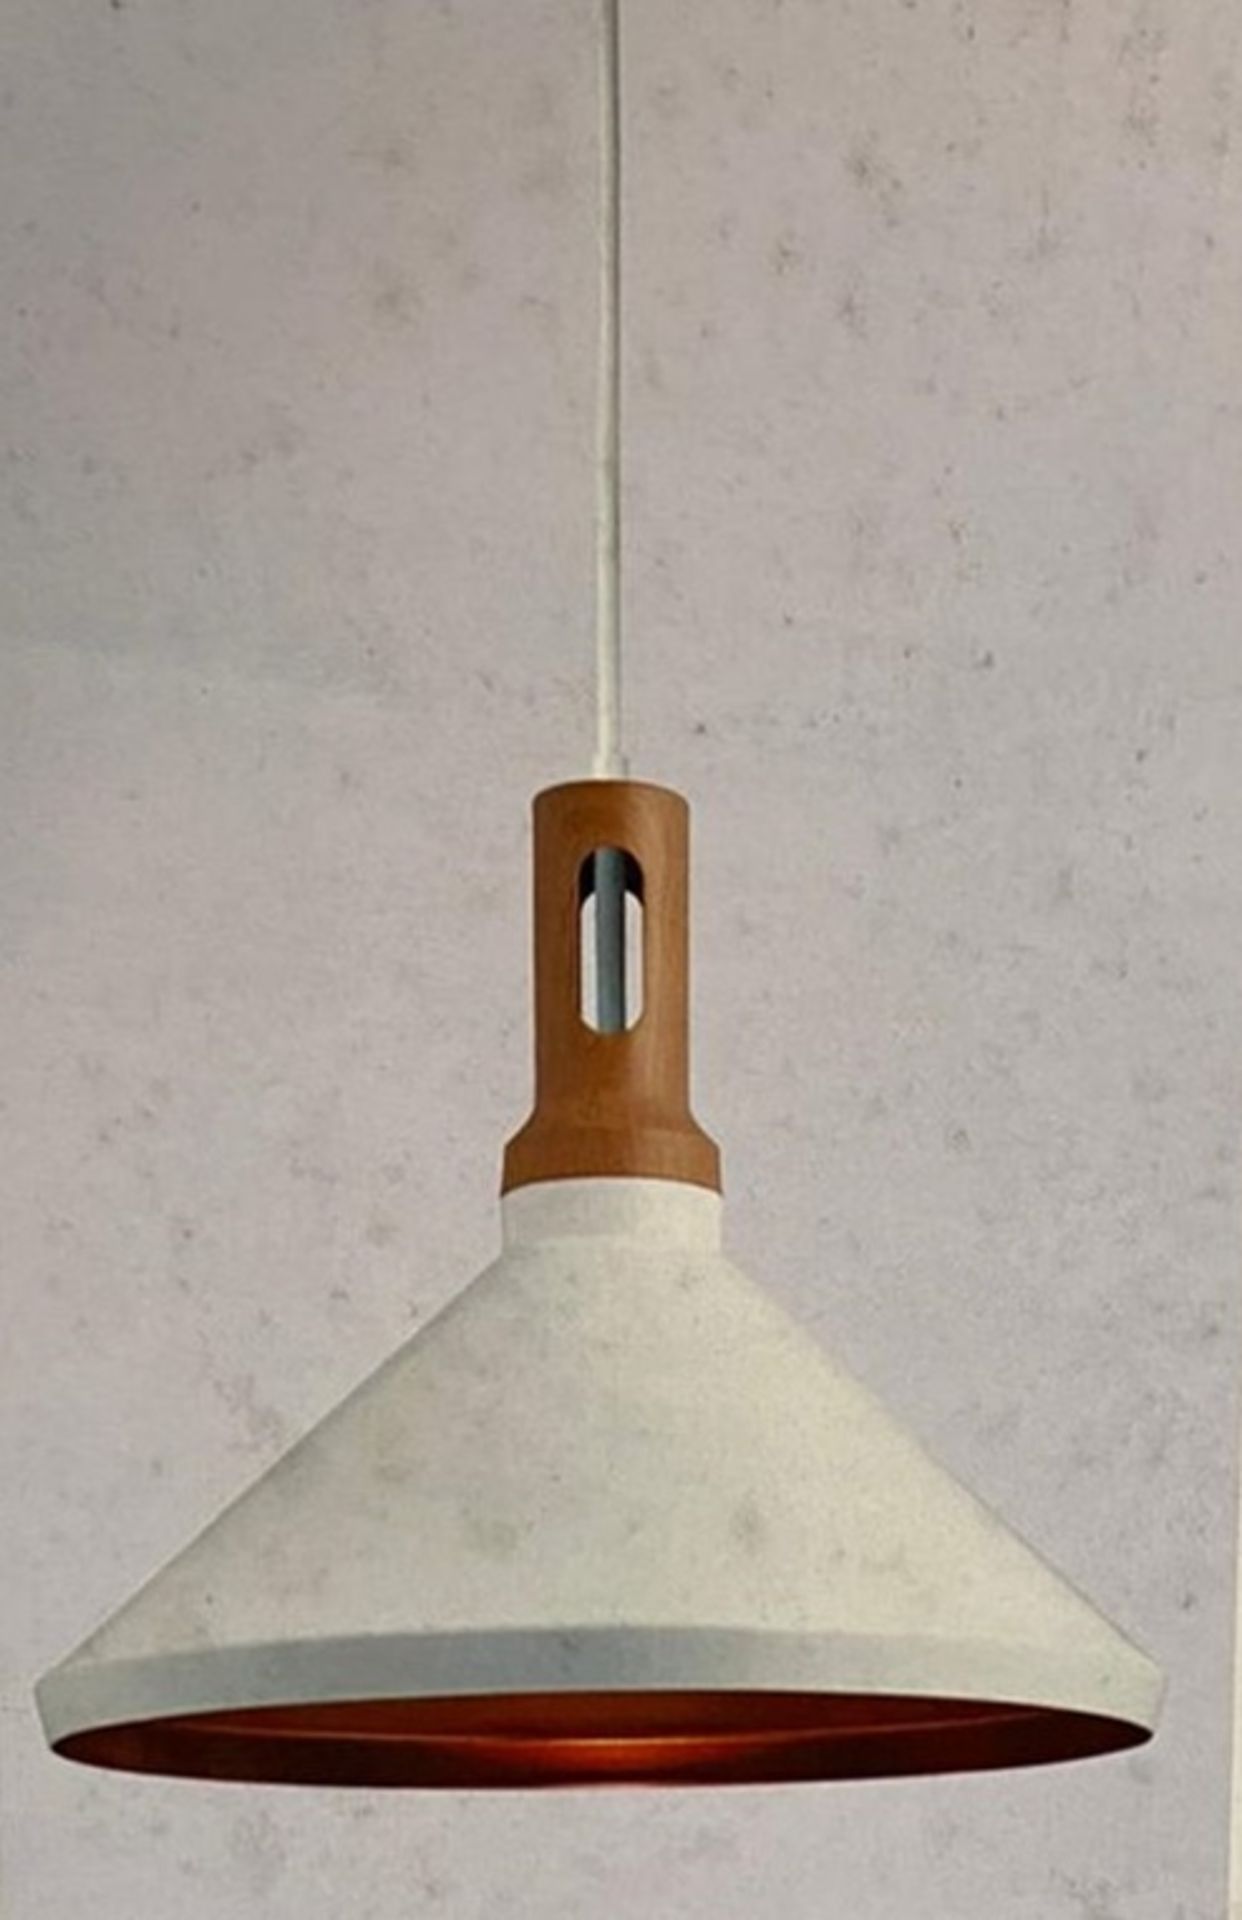 2 x Searchlight 1 Light Cone Pendant in white - Ref: 7051WH - New and Boxed - RRP: £85(each)